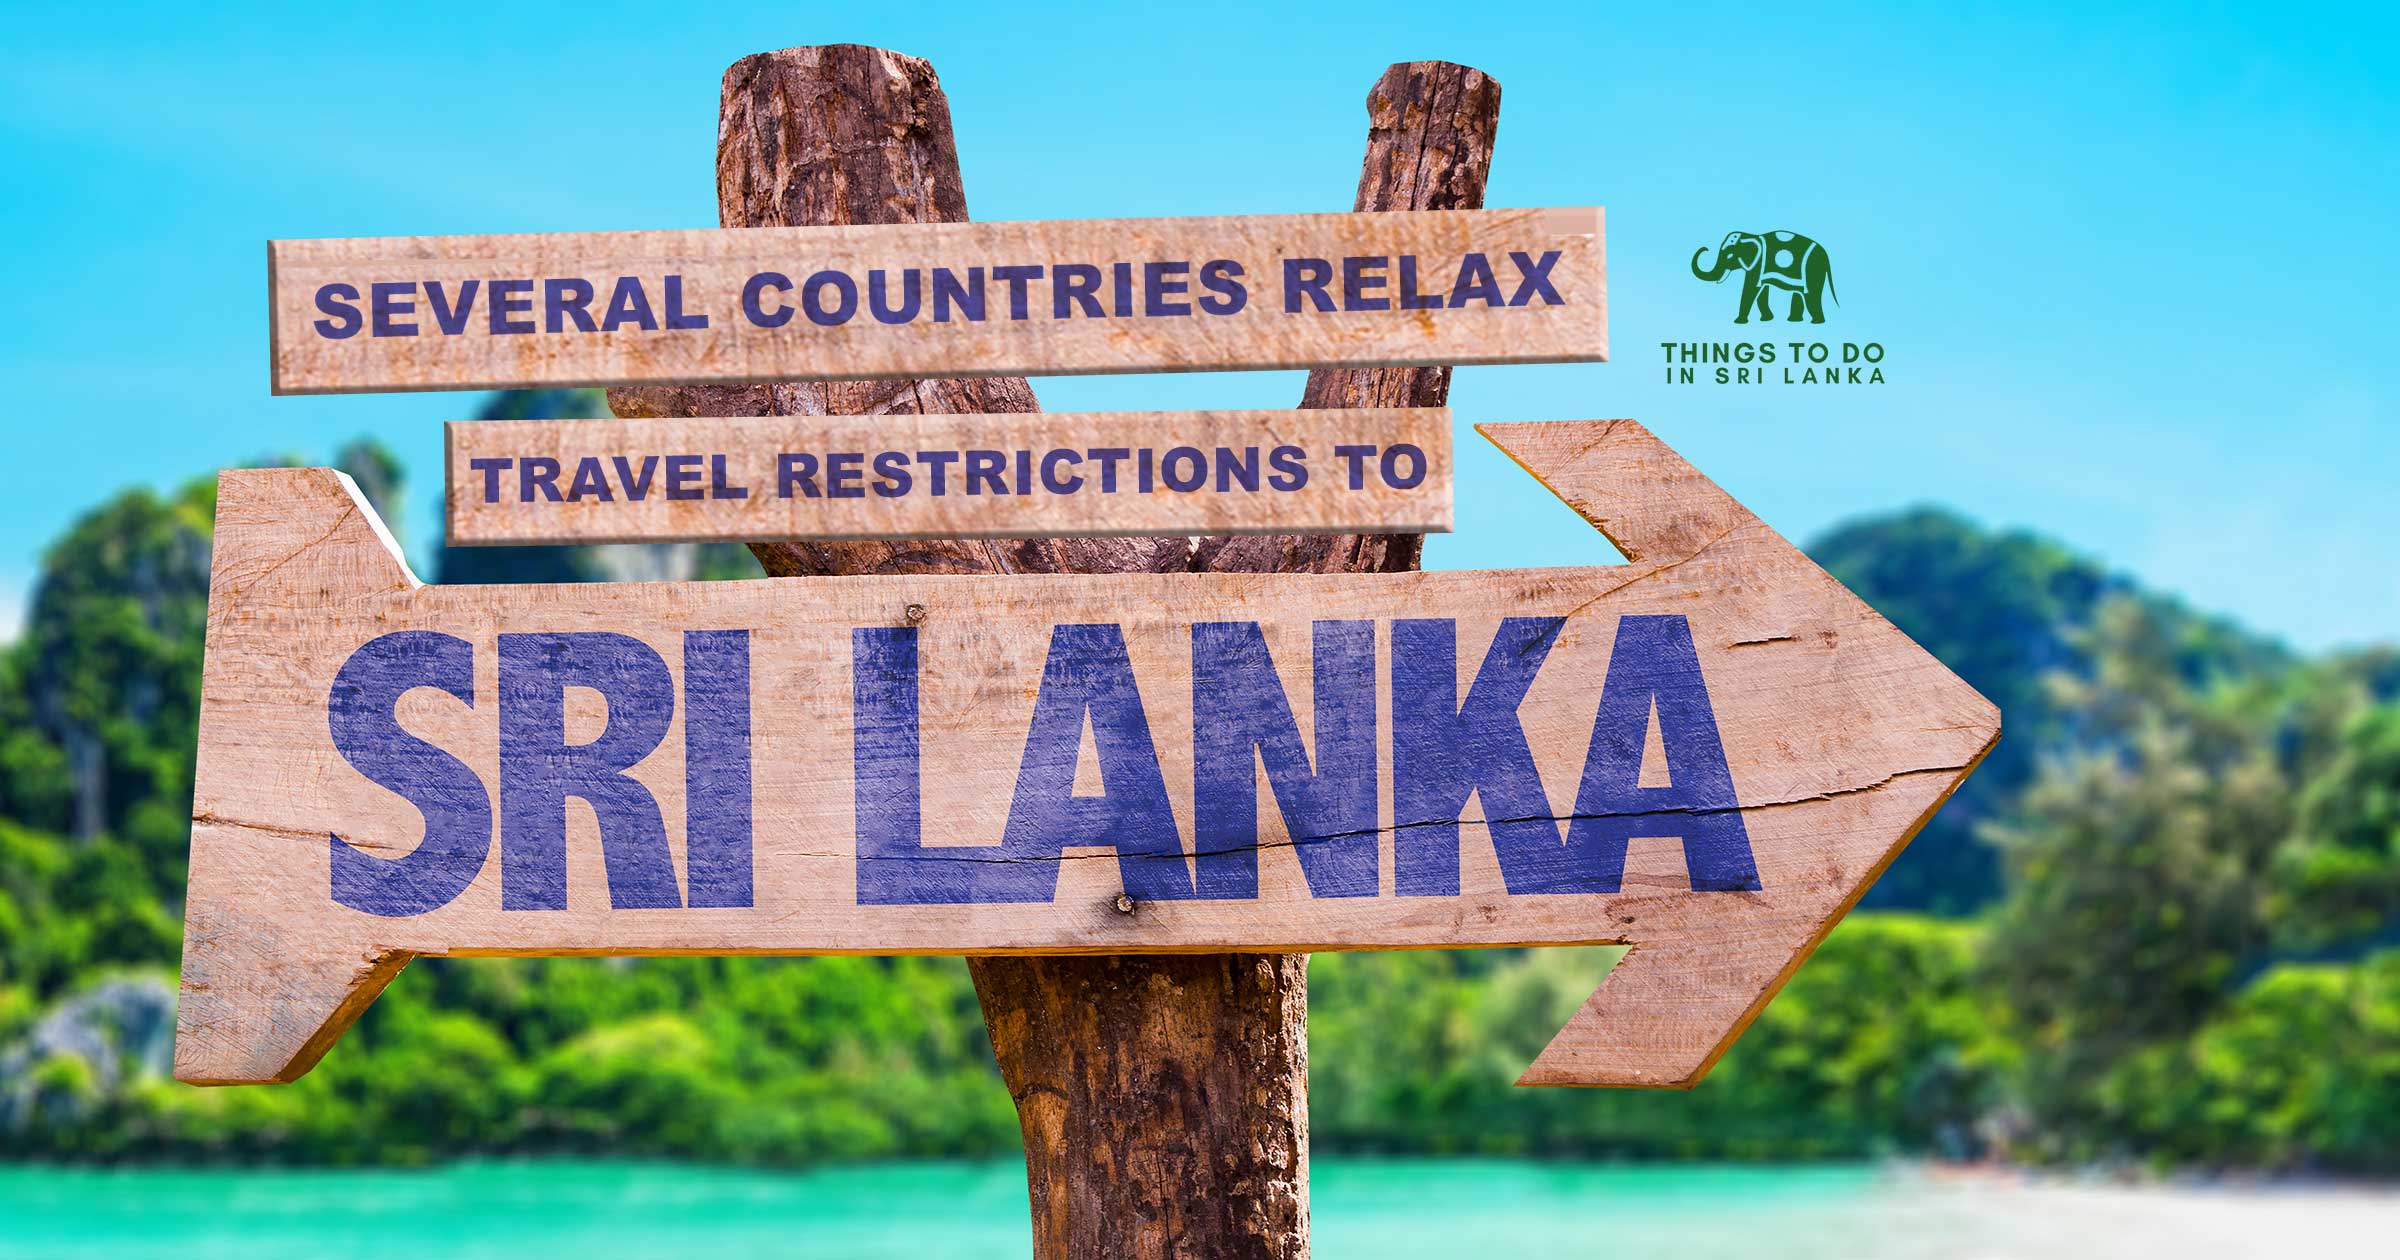 Several countries relax travel restrictions to Sri Lanka